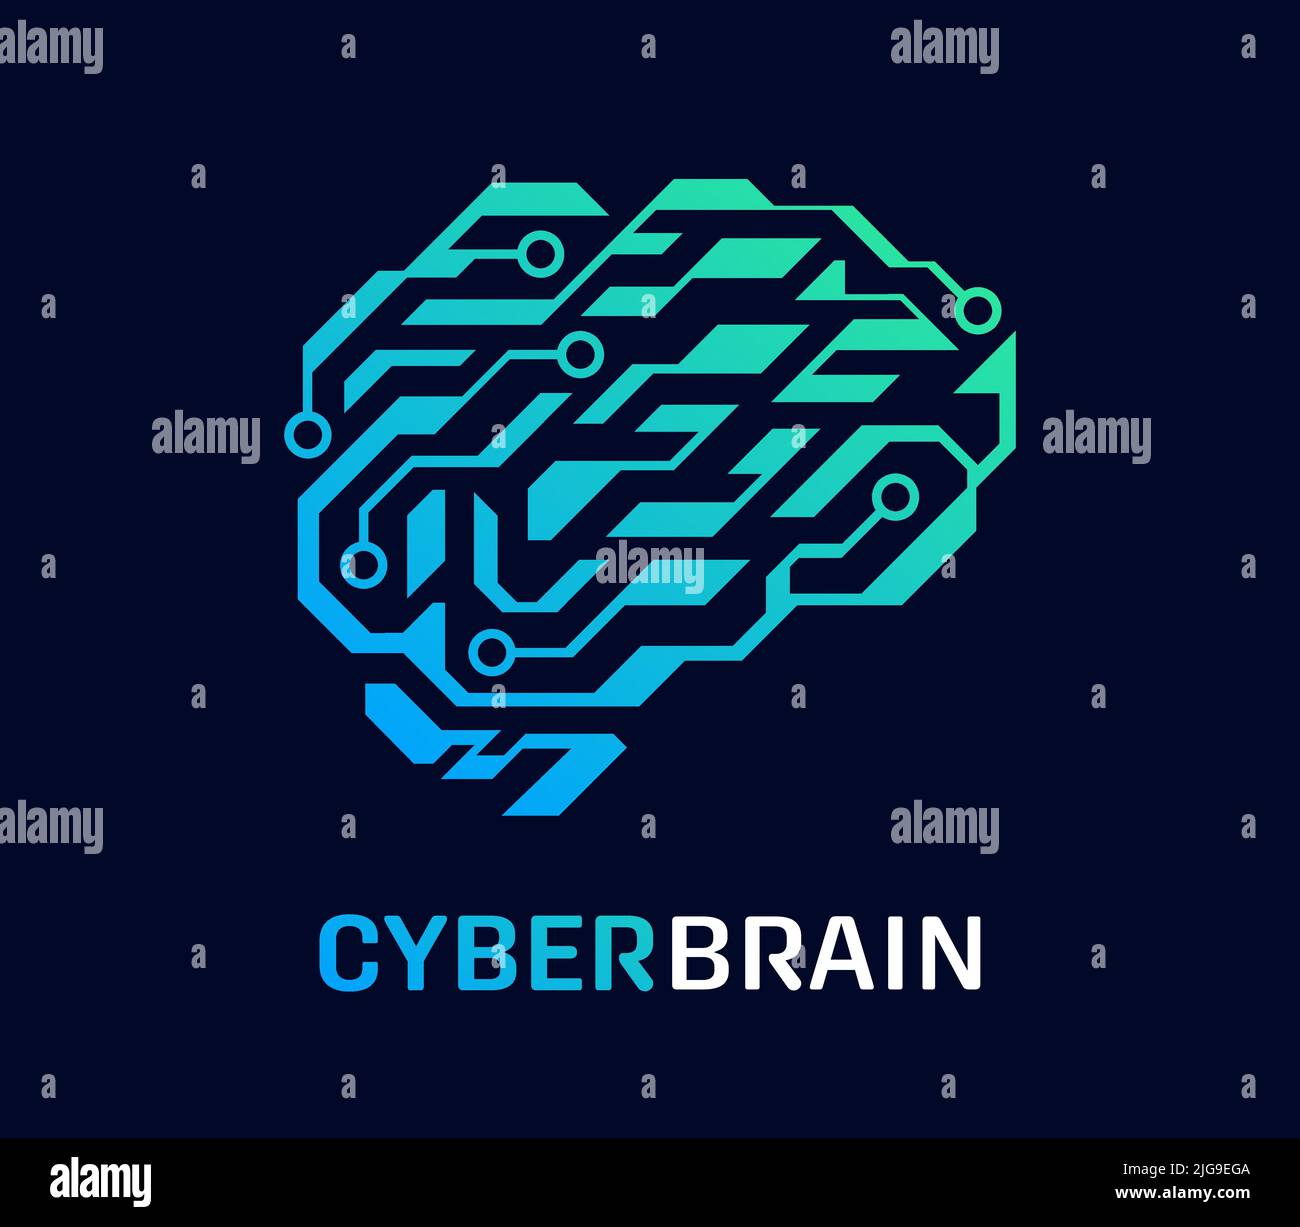 Cyberbrain vector logo. Artificial human brain. AI (artificial intelligence) concept. Isolated on dark background Stock Vector